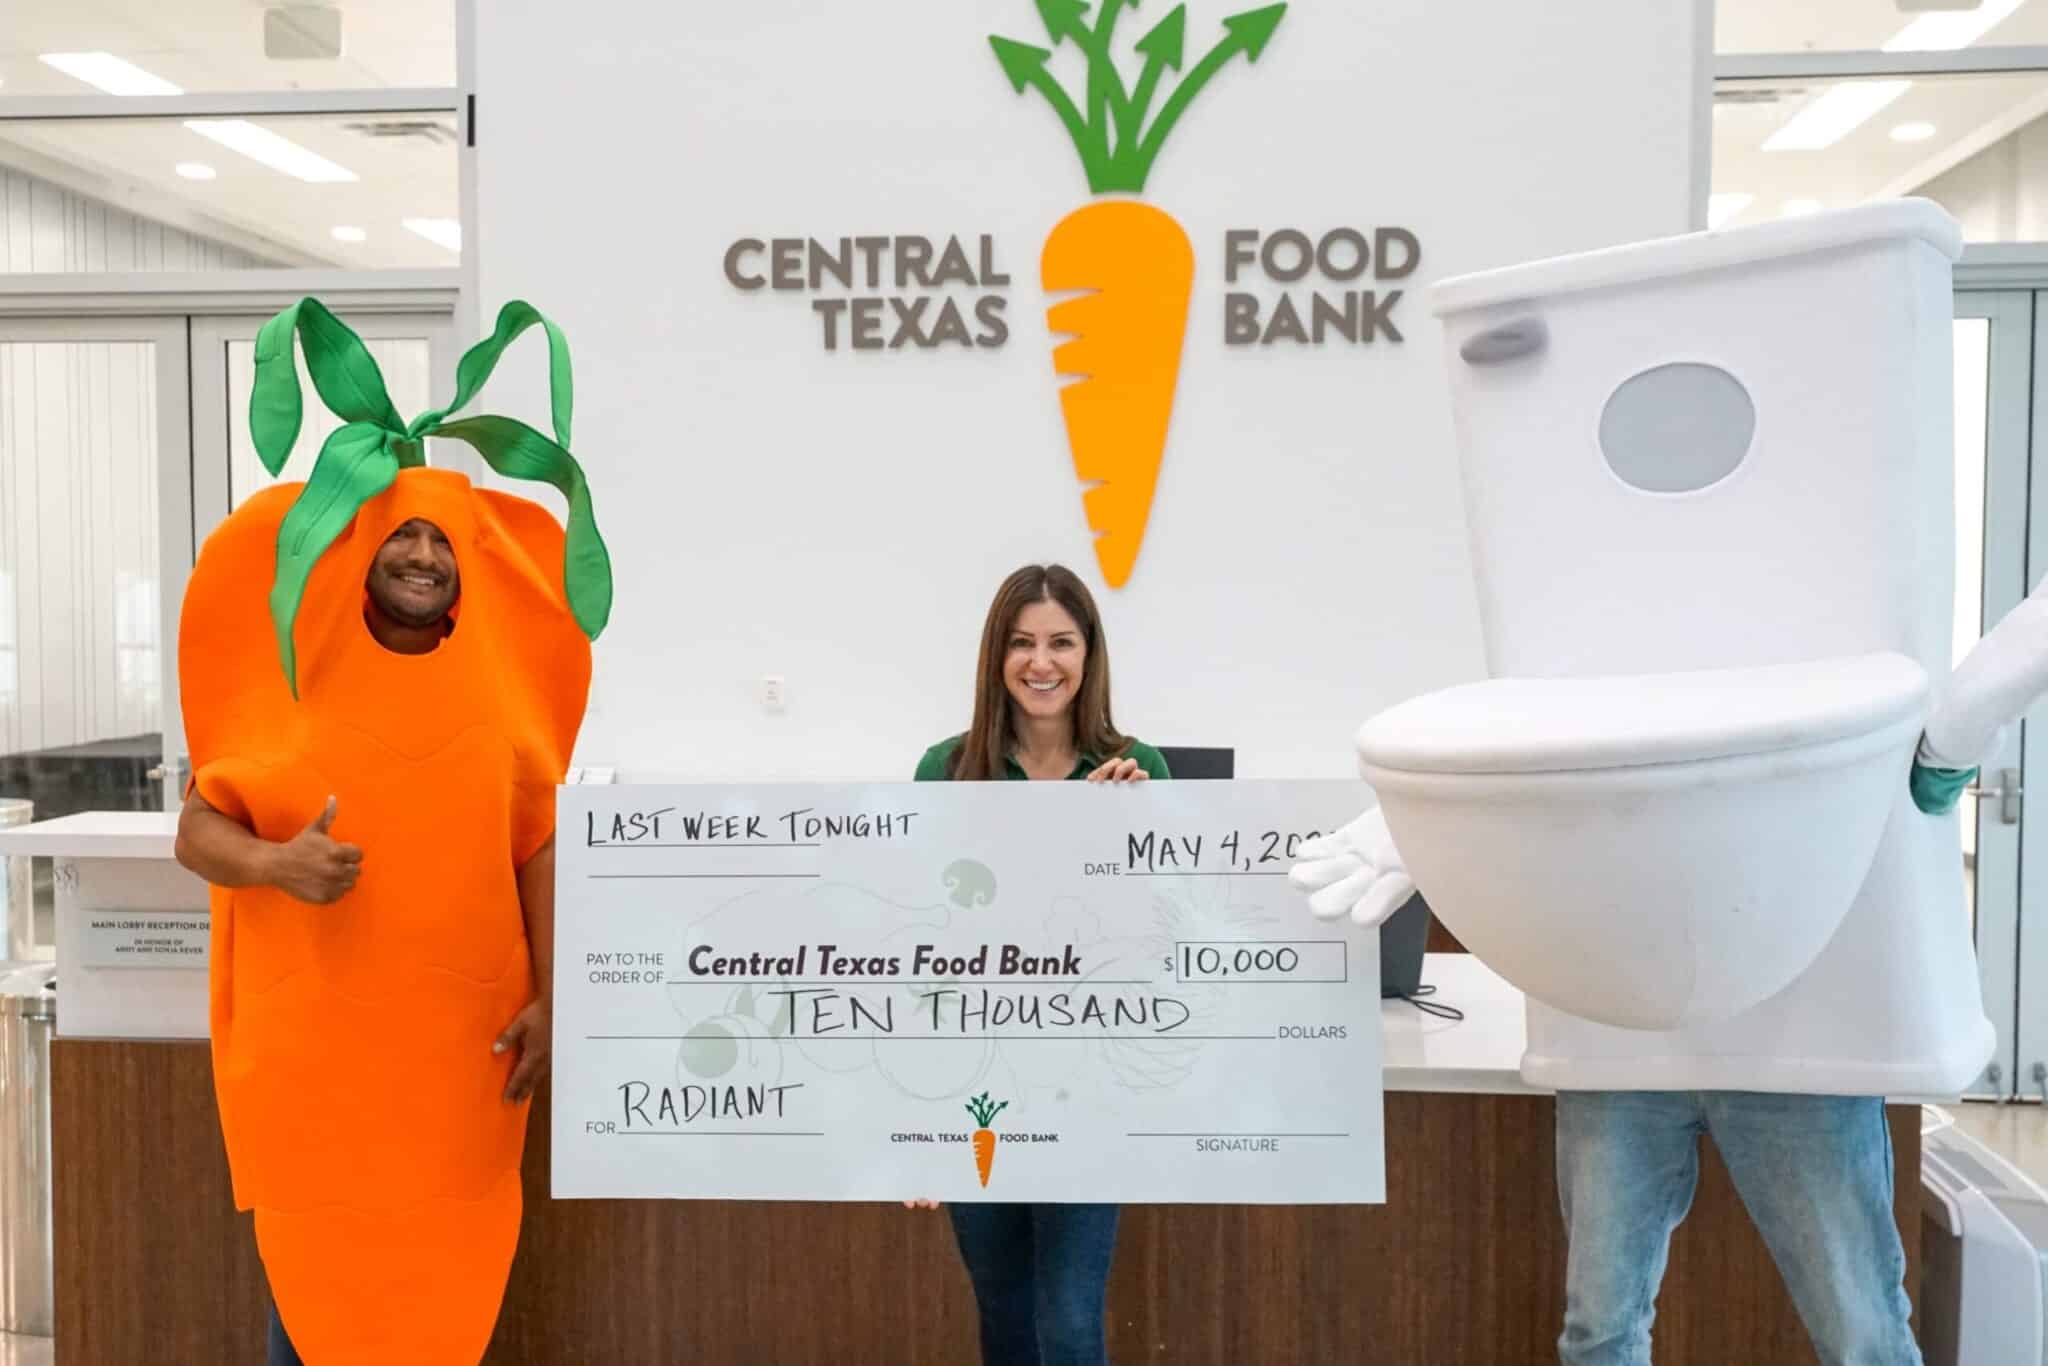 Team Radiant and the Central Texas Food Bank celebrating the $10,000 donation from John Oliver